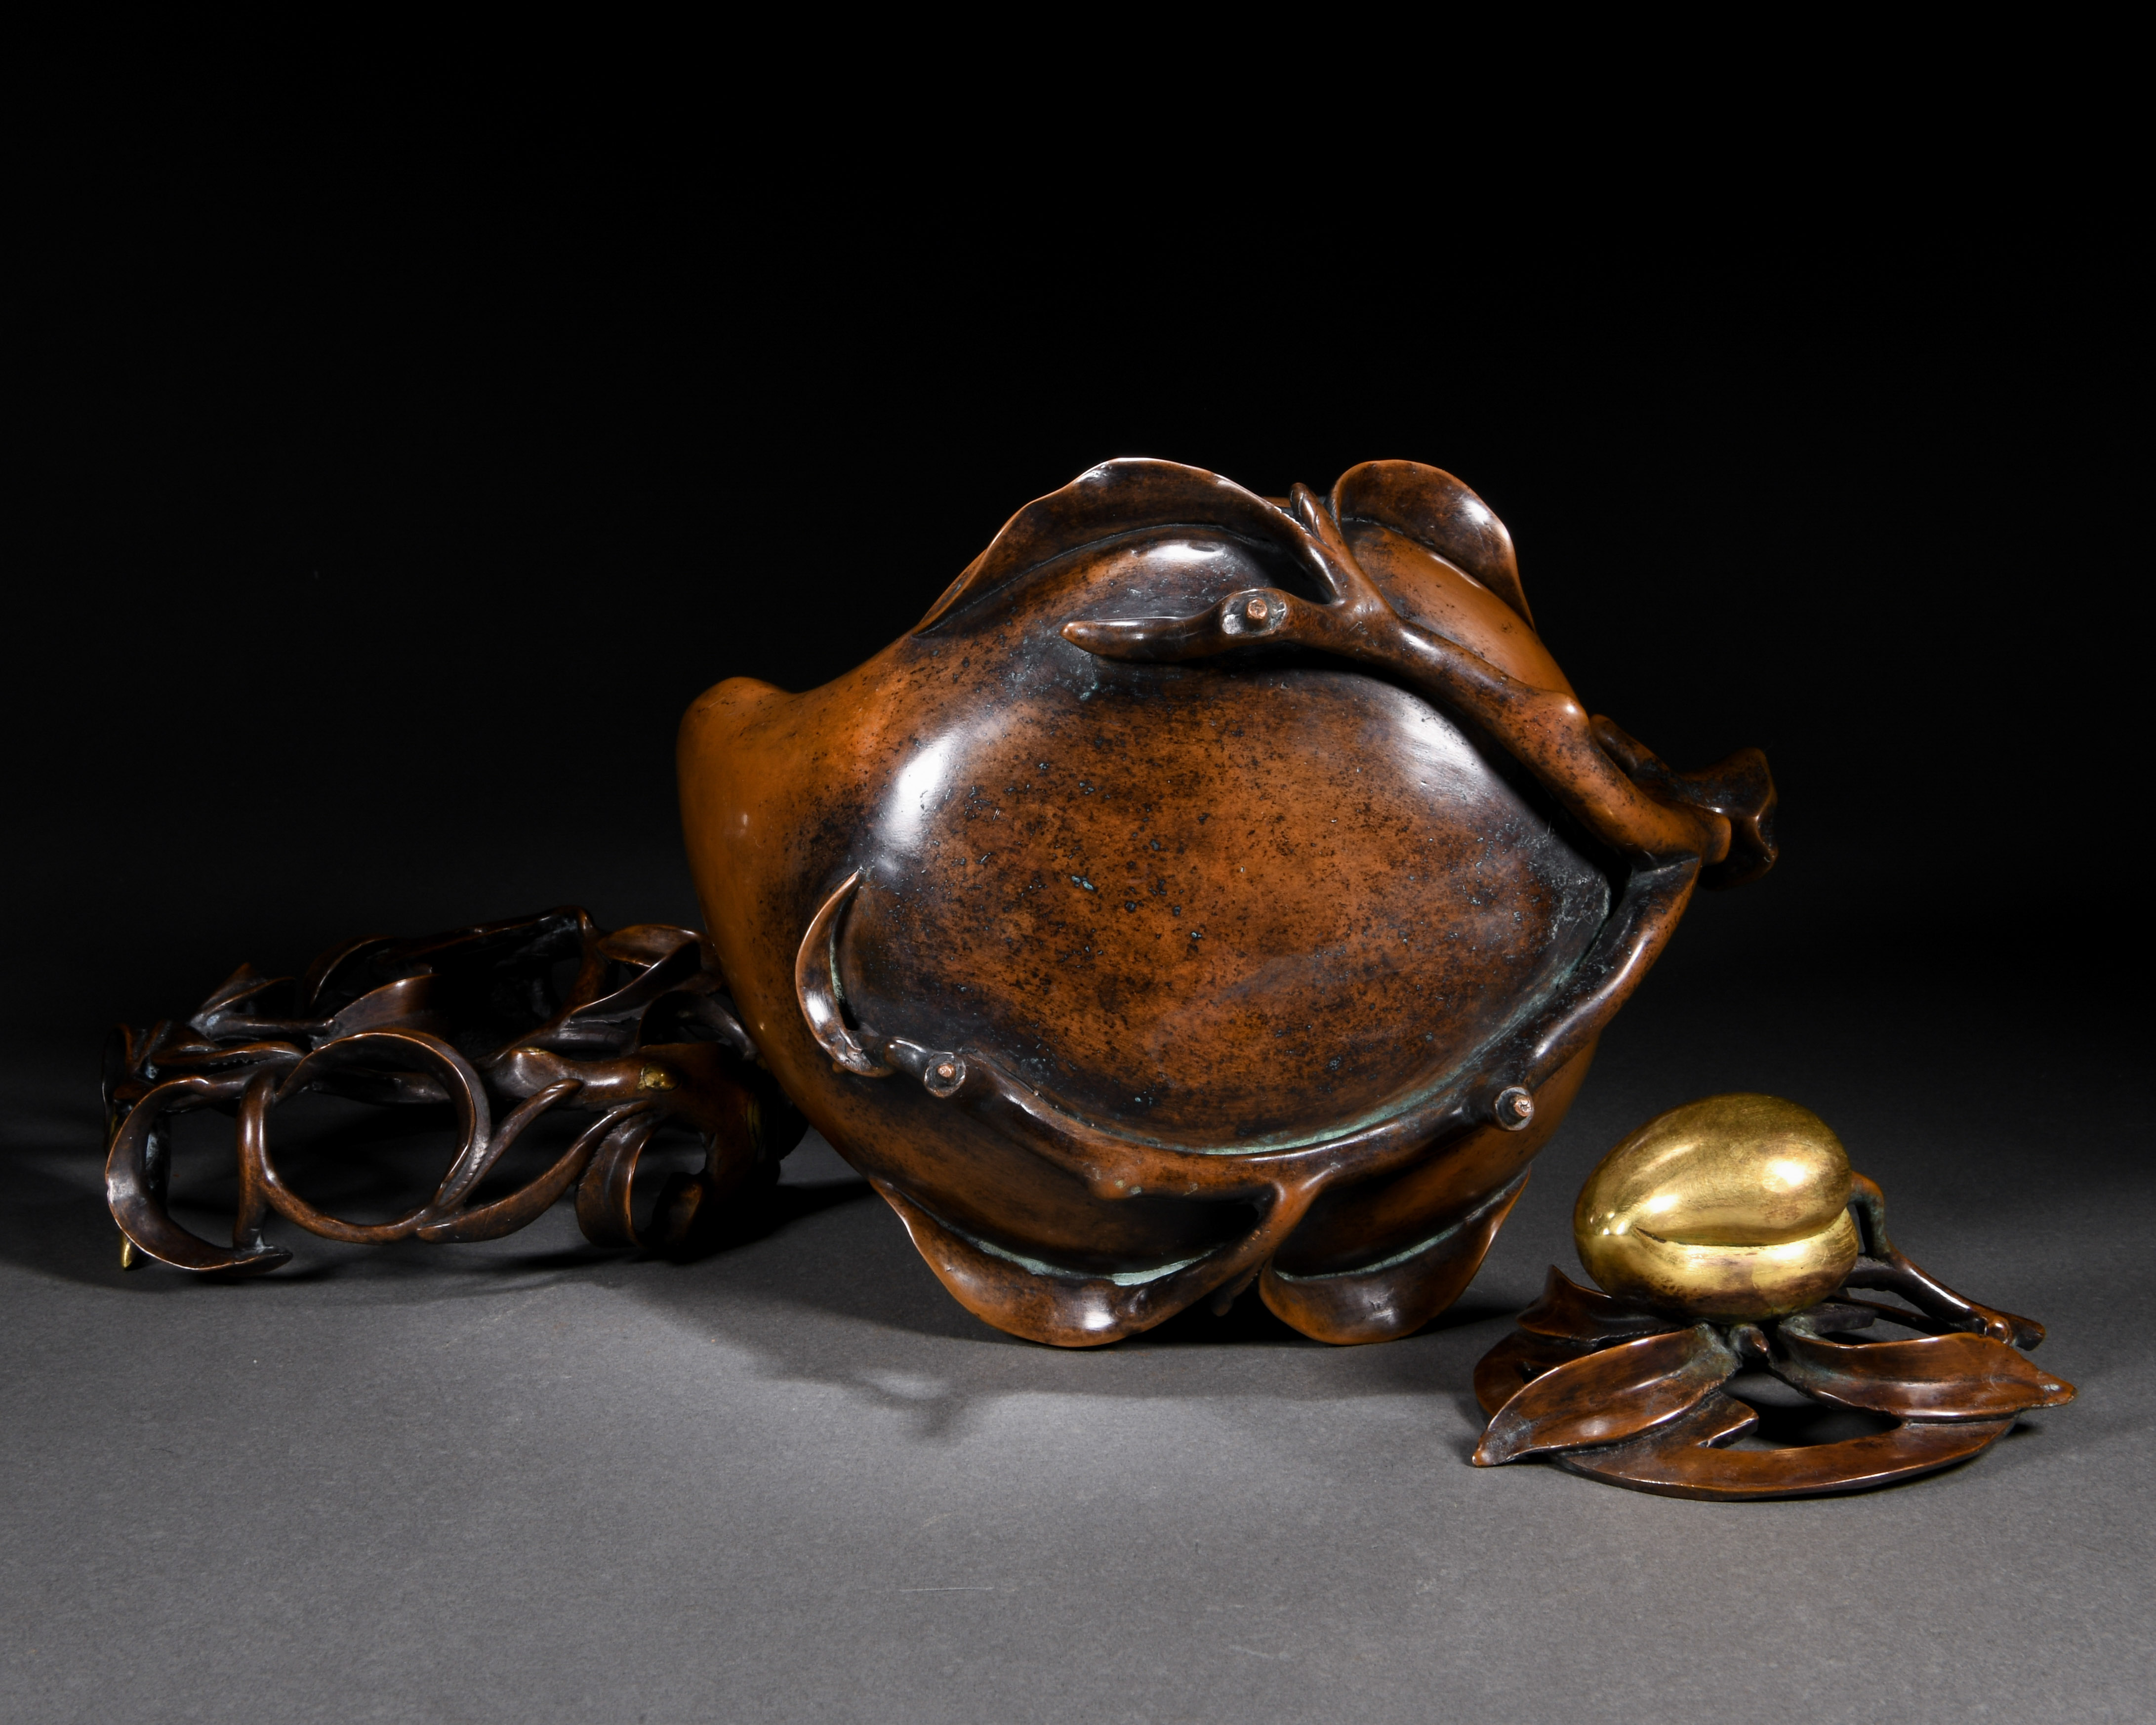 A Chinese Bronze Peach Shaped Incense Burner - Image 10 of 10